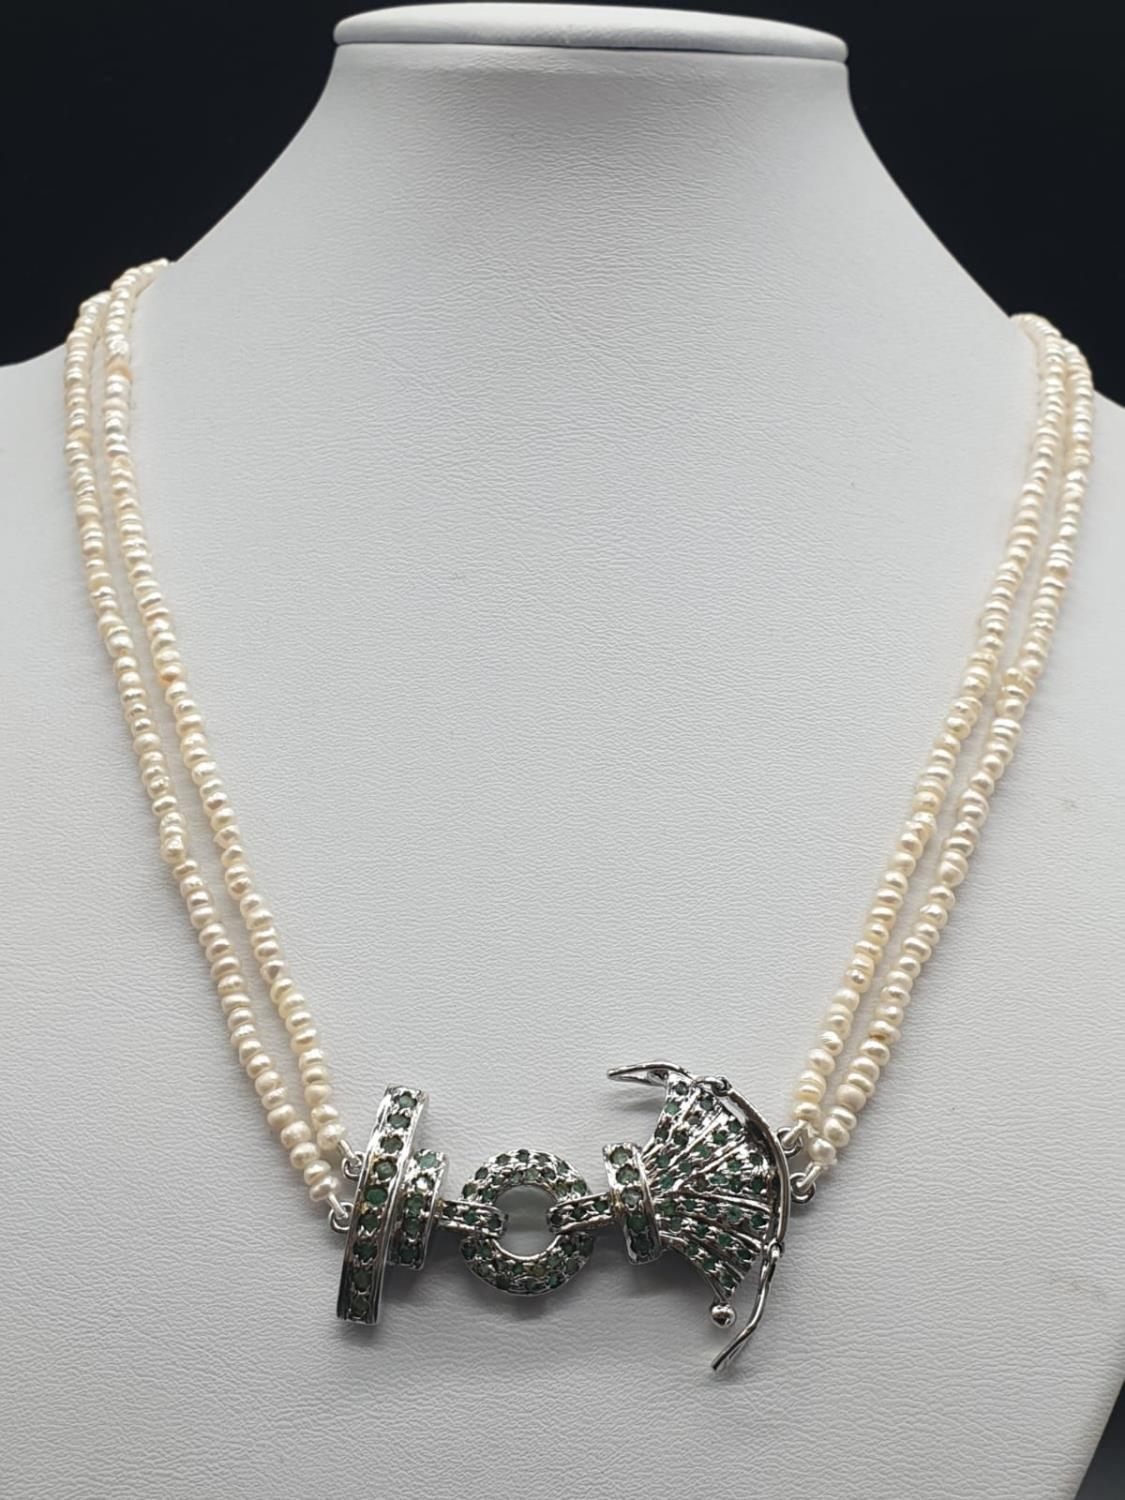 65 Ct Beaded Pearl necklace with a Silver pendant adorned with emeralds - Image 2 of 7